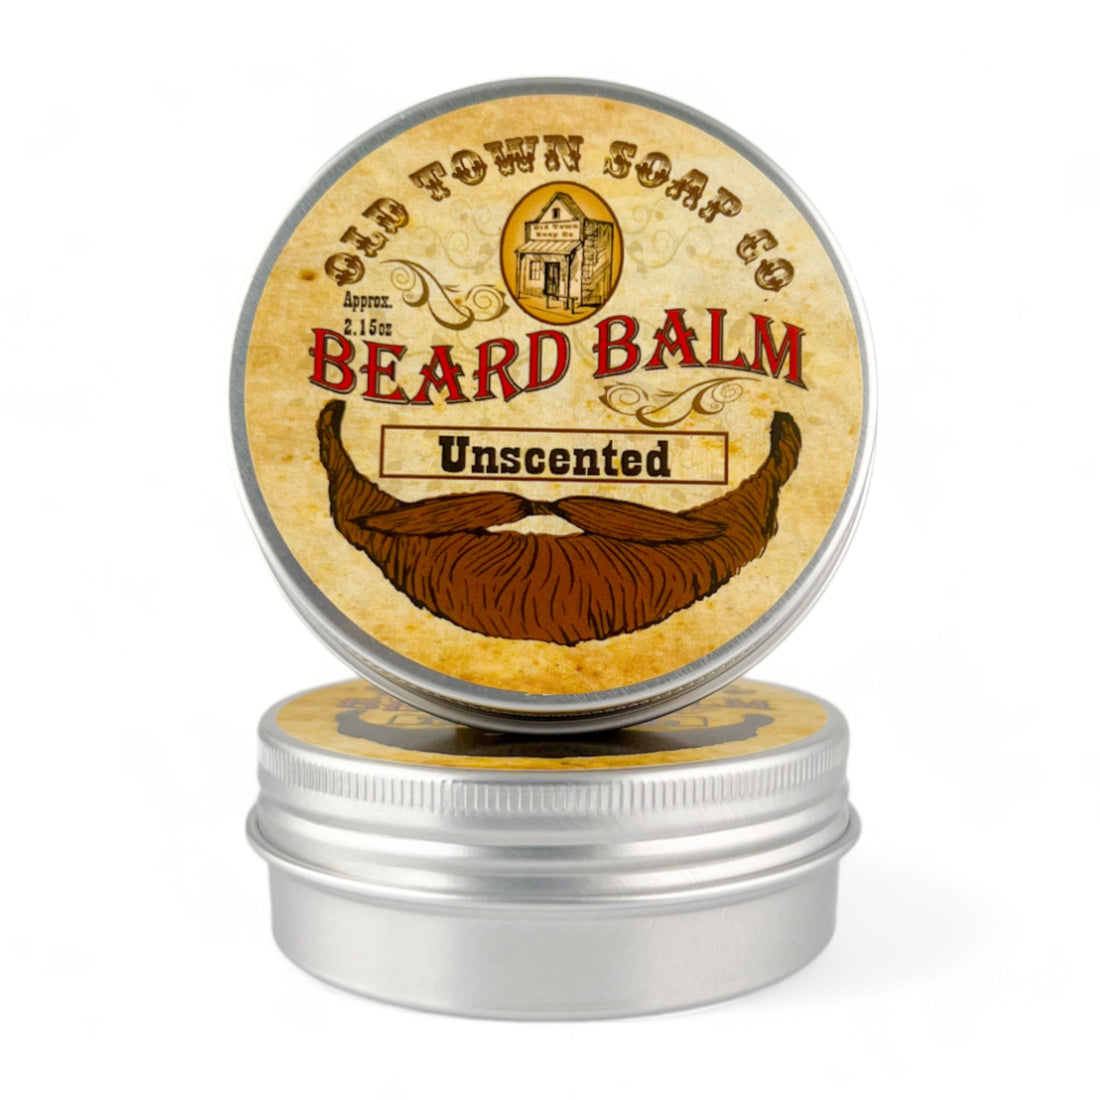 Unscented Beard Balm - Old Town Soap Co.